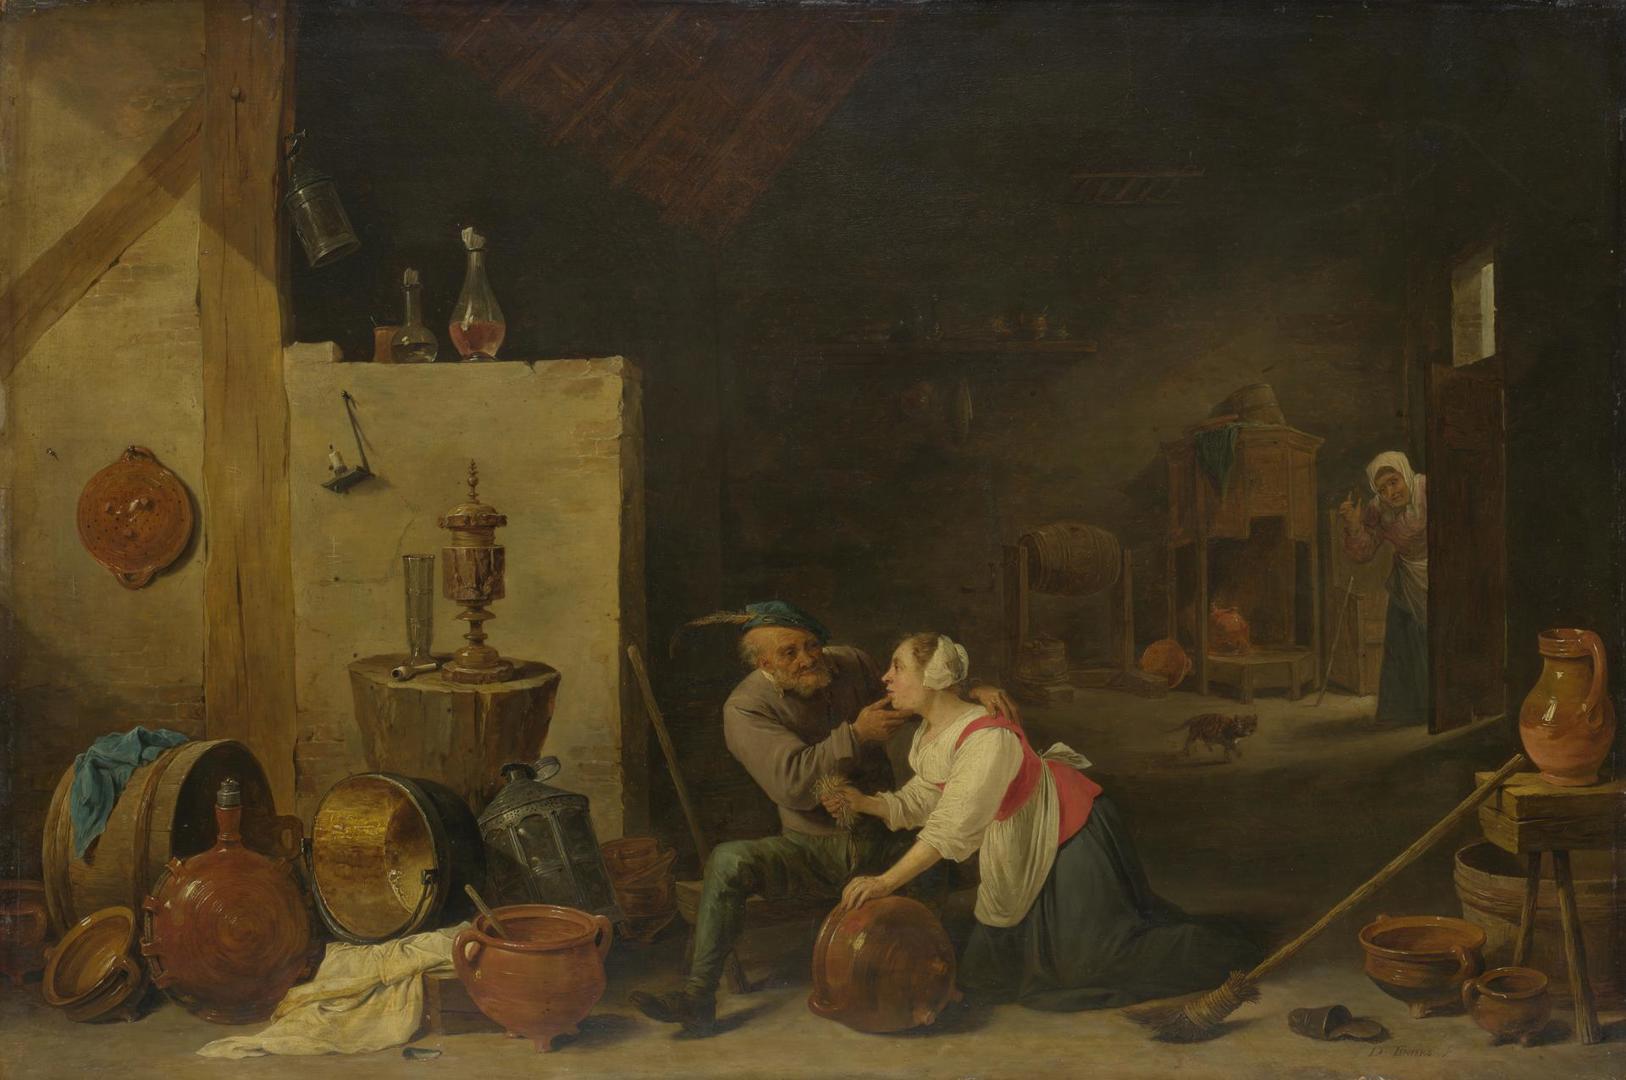 An Old Peasant caresses a Kitchen Maid in a Stable by David Teniers the Younger